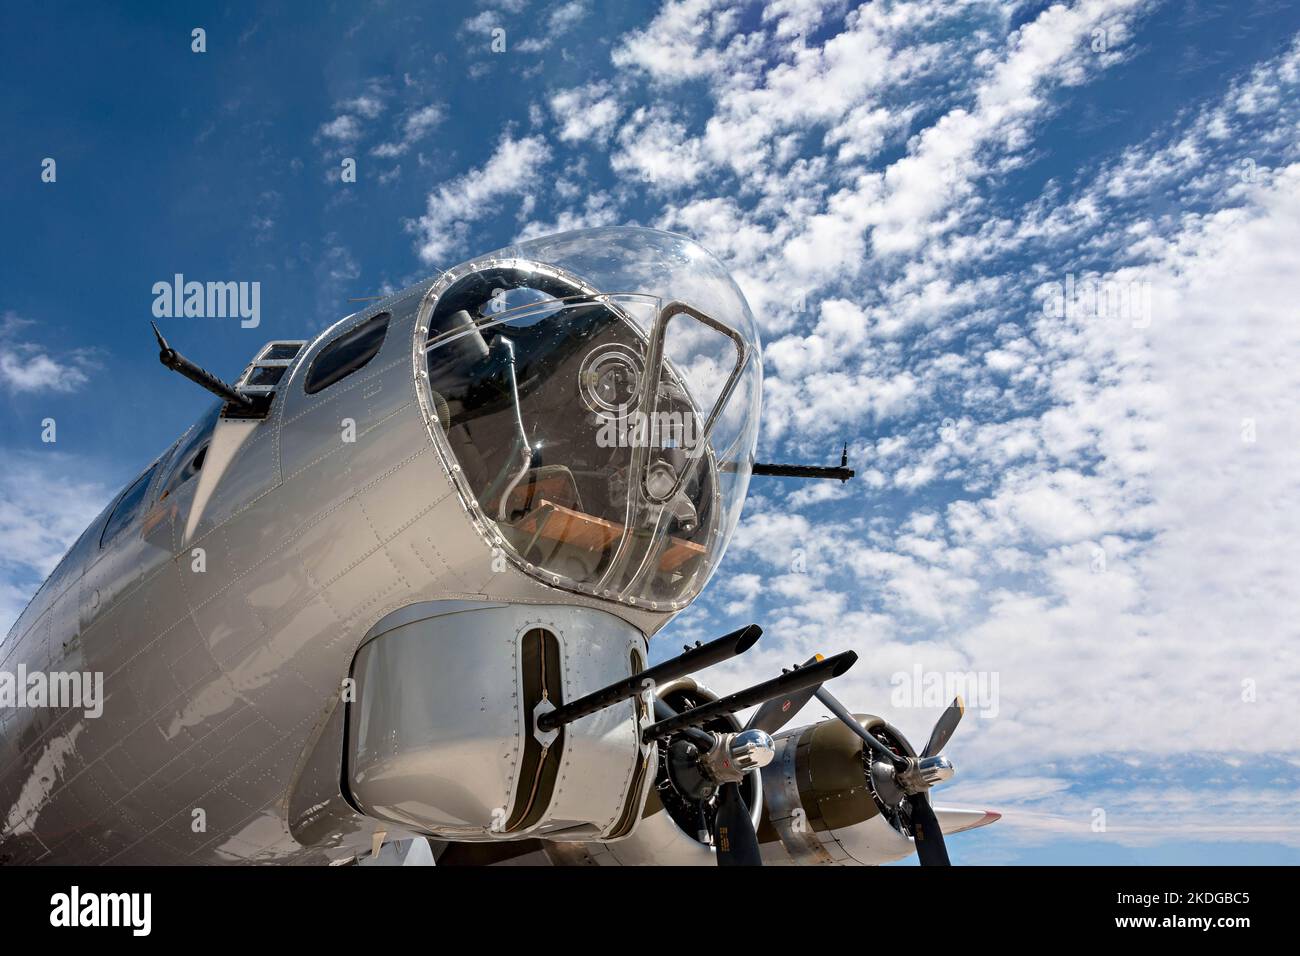 B17 Flying Fortress Bomber Aluminum Overcast USAF WWII Aircraft pictured in Flagstaff, Arizona, USA Stock Photo